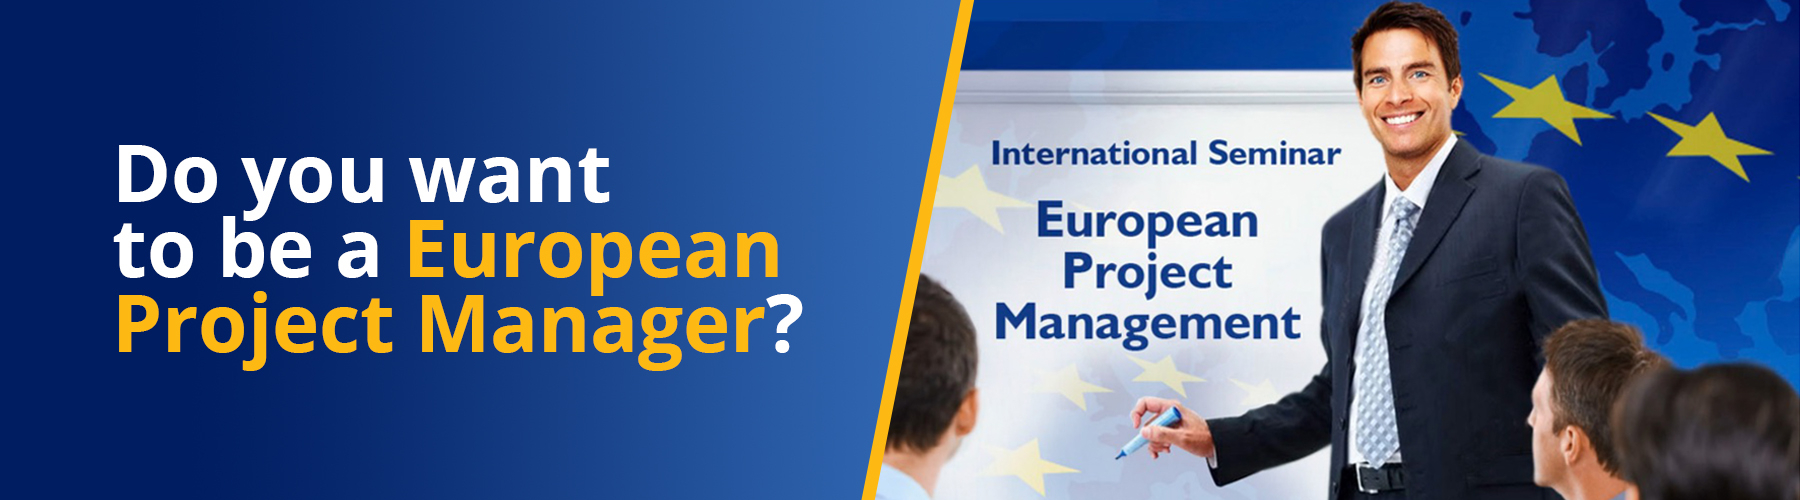 Do you want to be a European Project Manager?